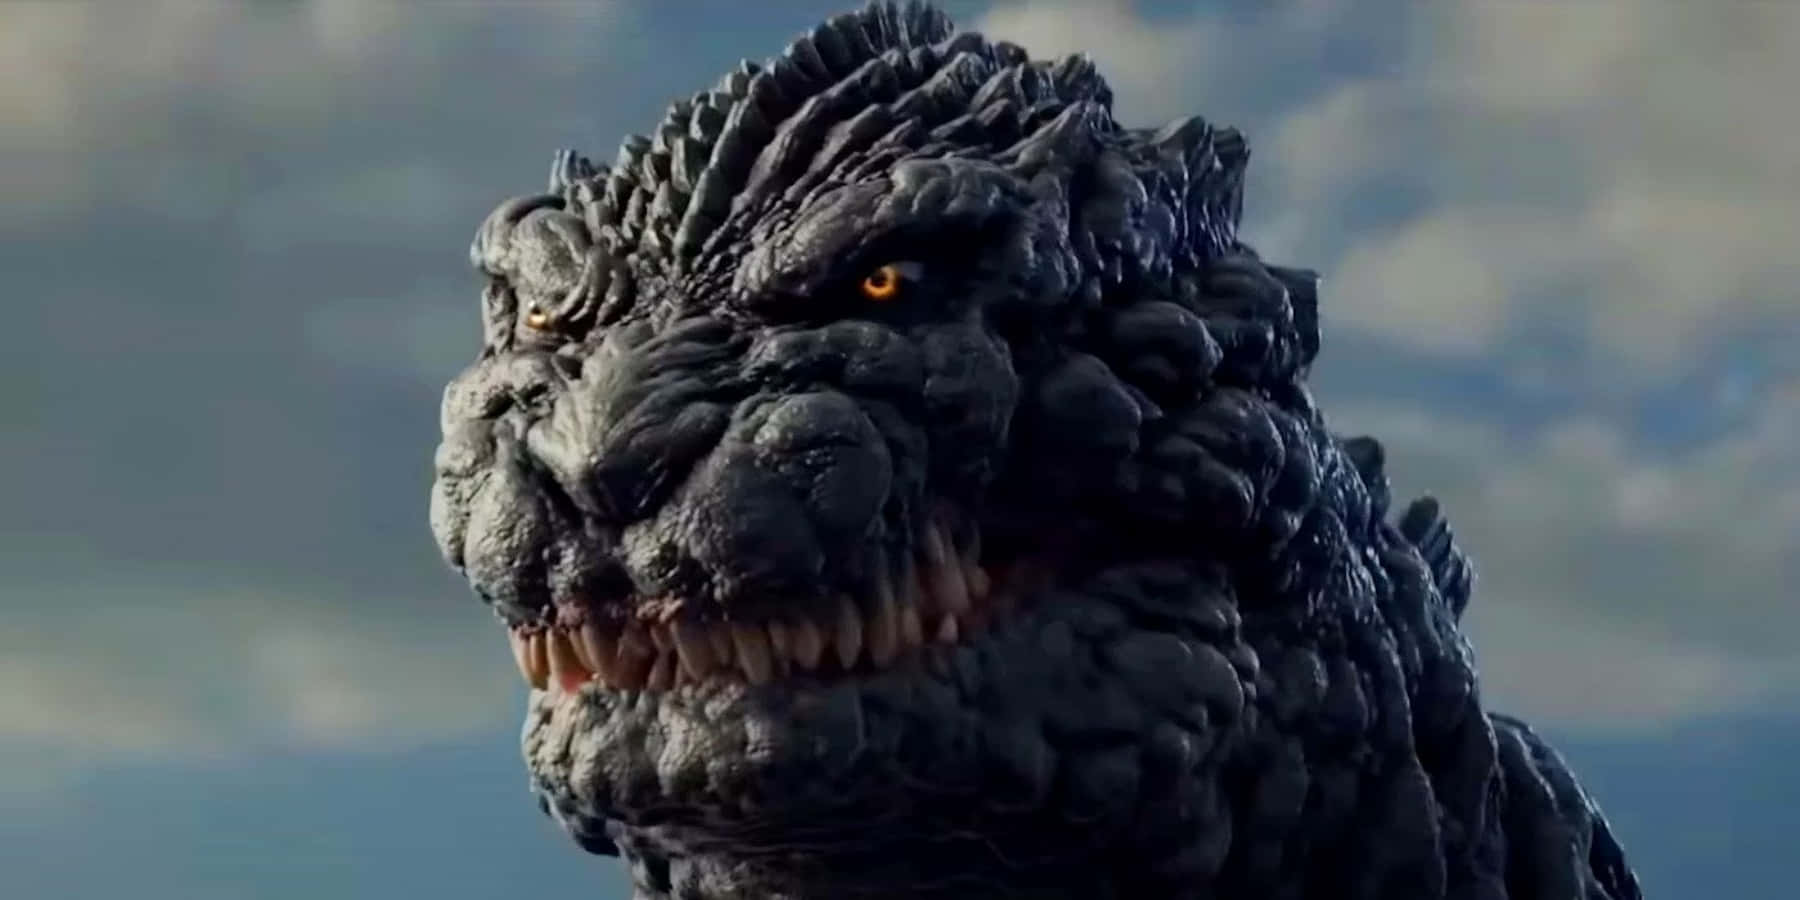 Godzilla Close-Up With Sky Background Picture